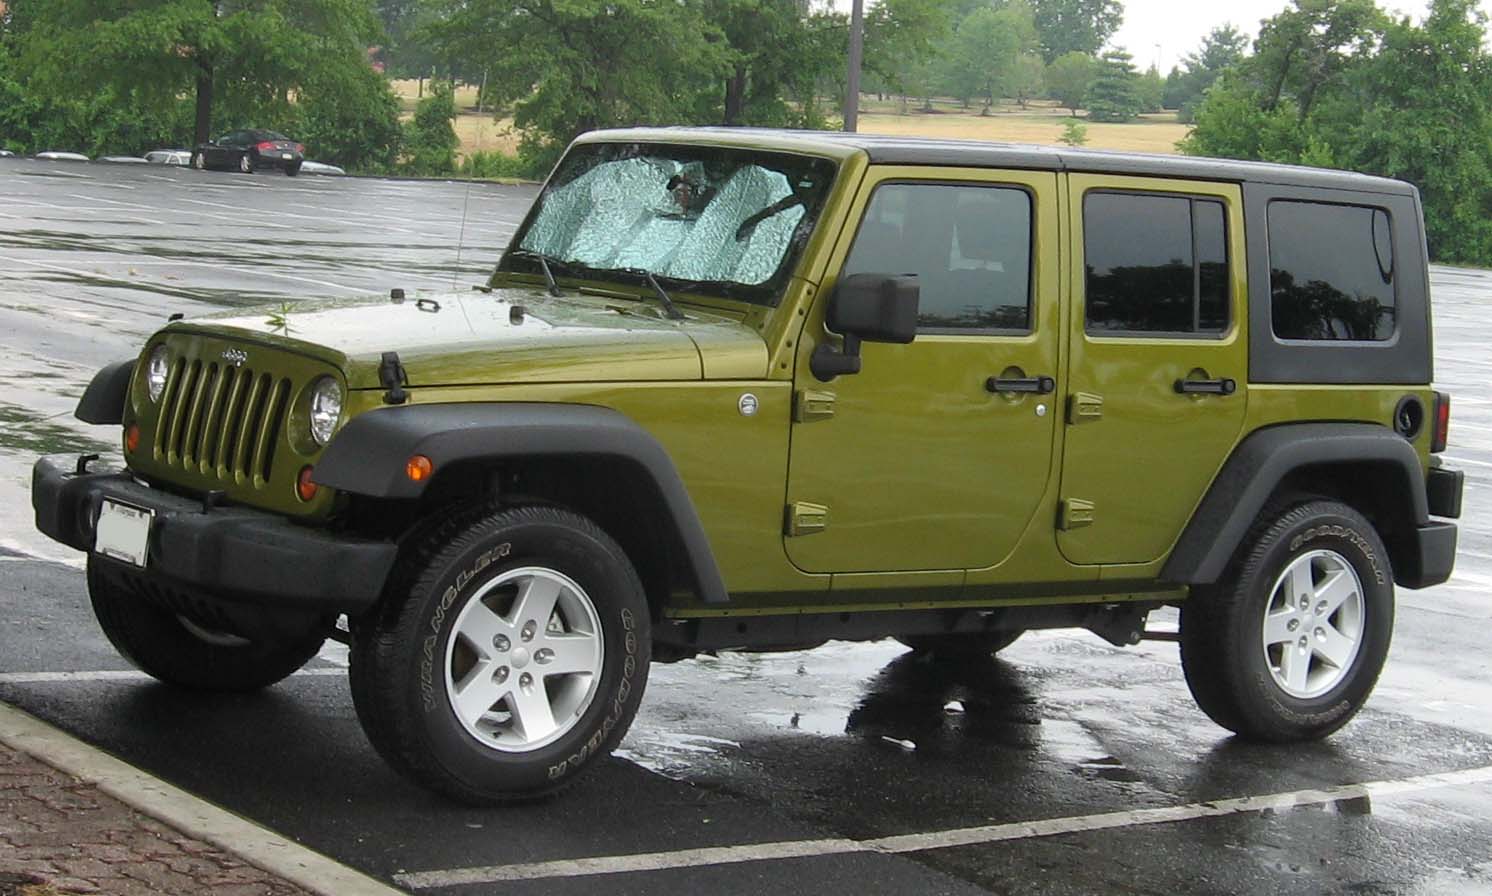 Jeep Wrangler Unlimited Technical Details History Photos